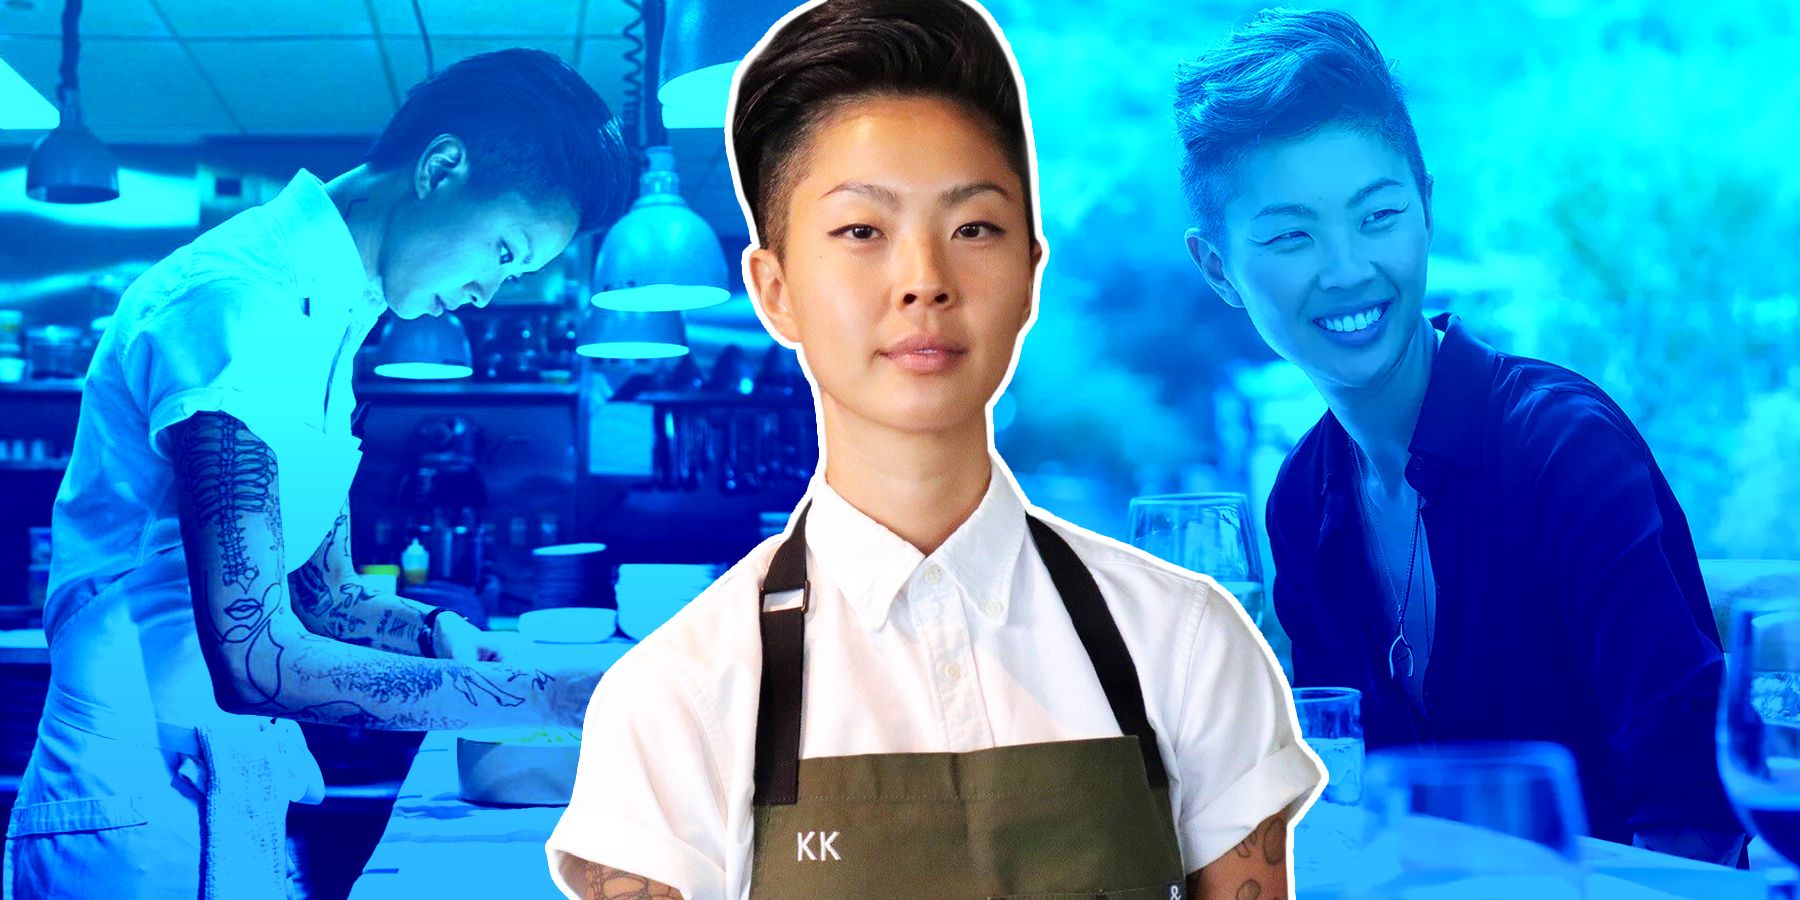 Kristen Kish stands in front of images from her Top Chef appearances